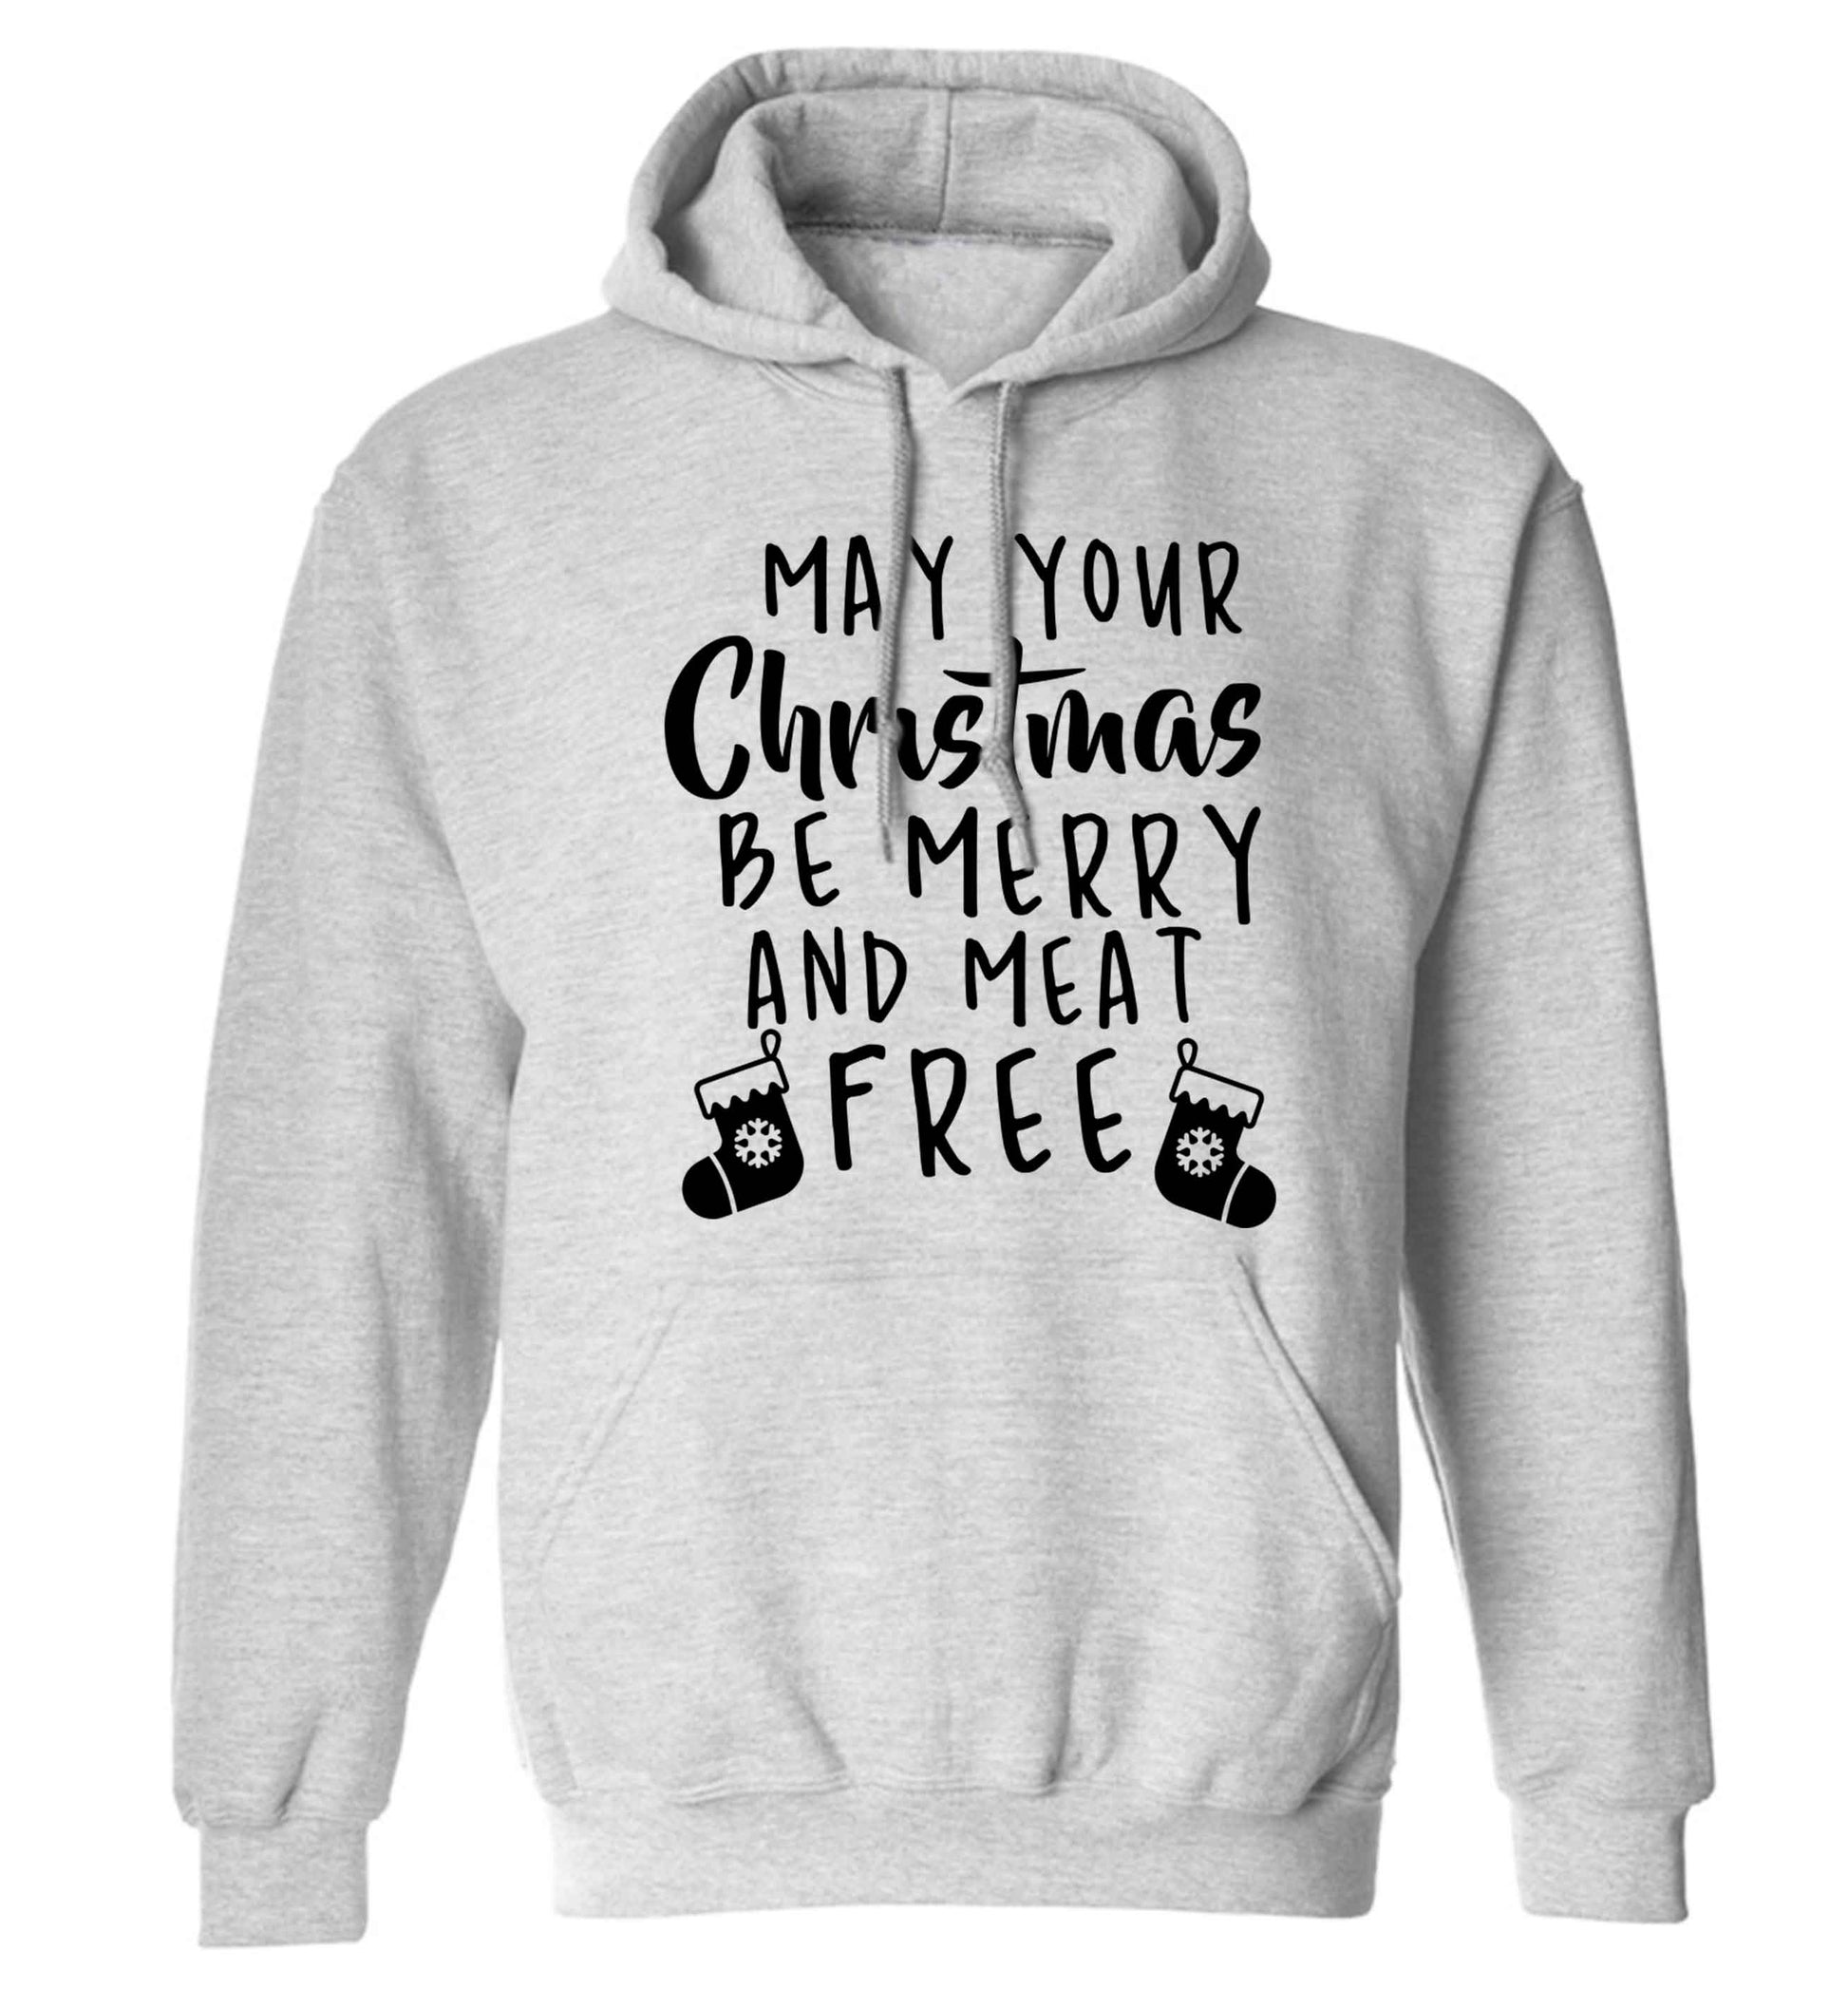 May your Christmas be merry and meat free adults unisex grey hoodie 2XL